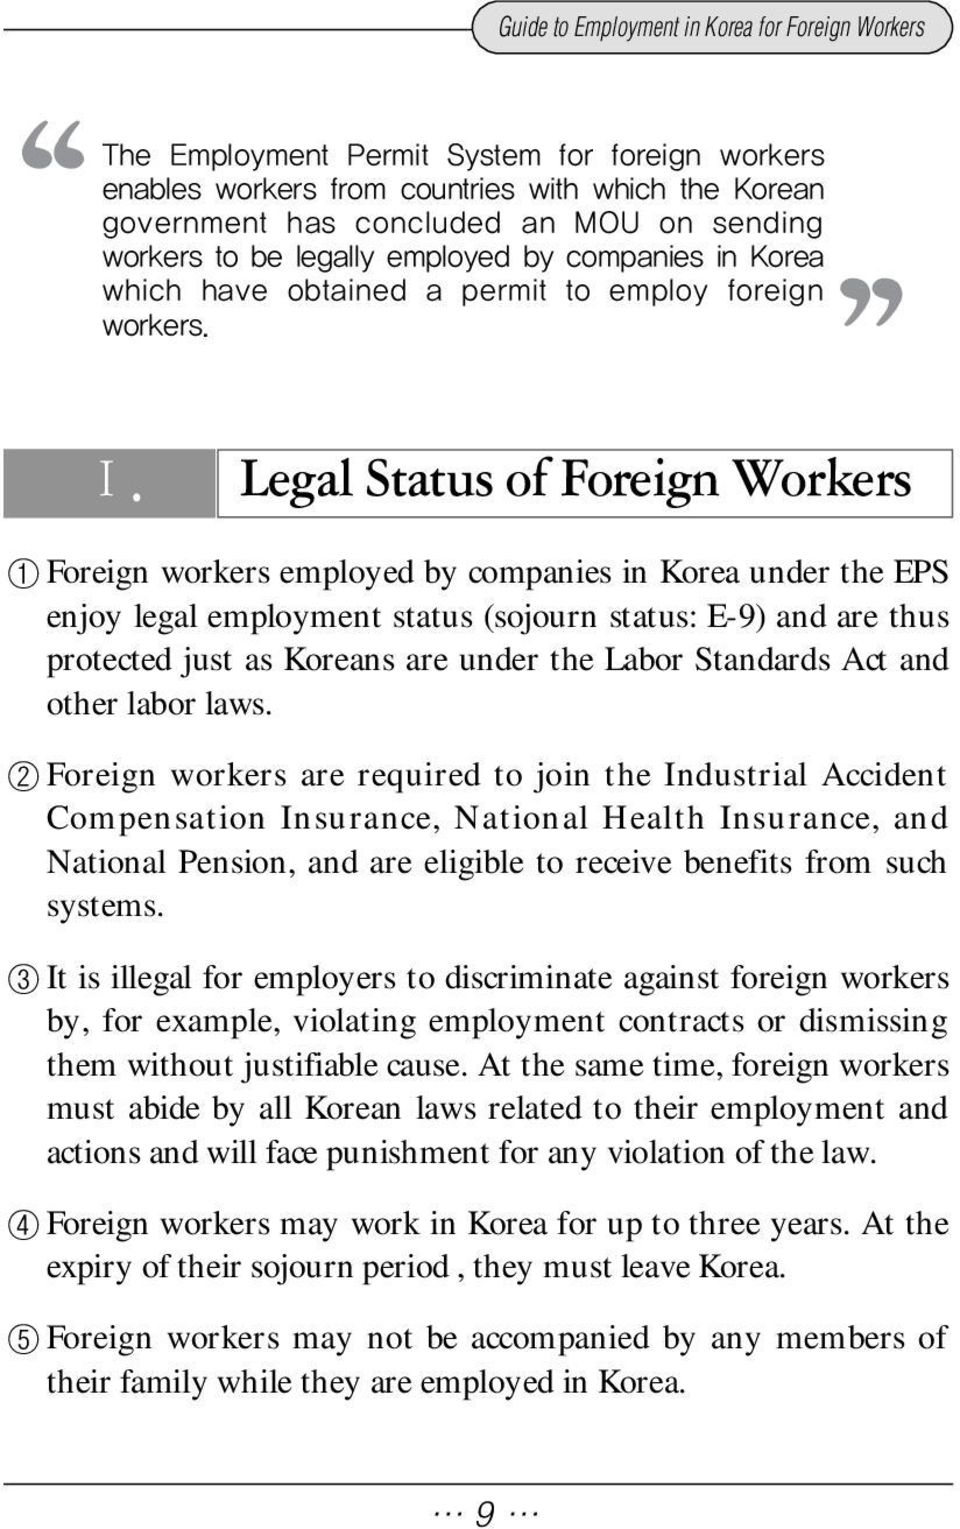 Foreign workers are required to join the Industrial Accident Compensation Insurance, National Health Insurance, and National Pension, and are eligible to receive benefits from such systems.